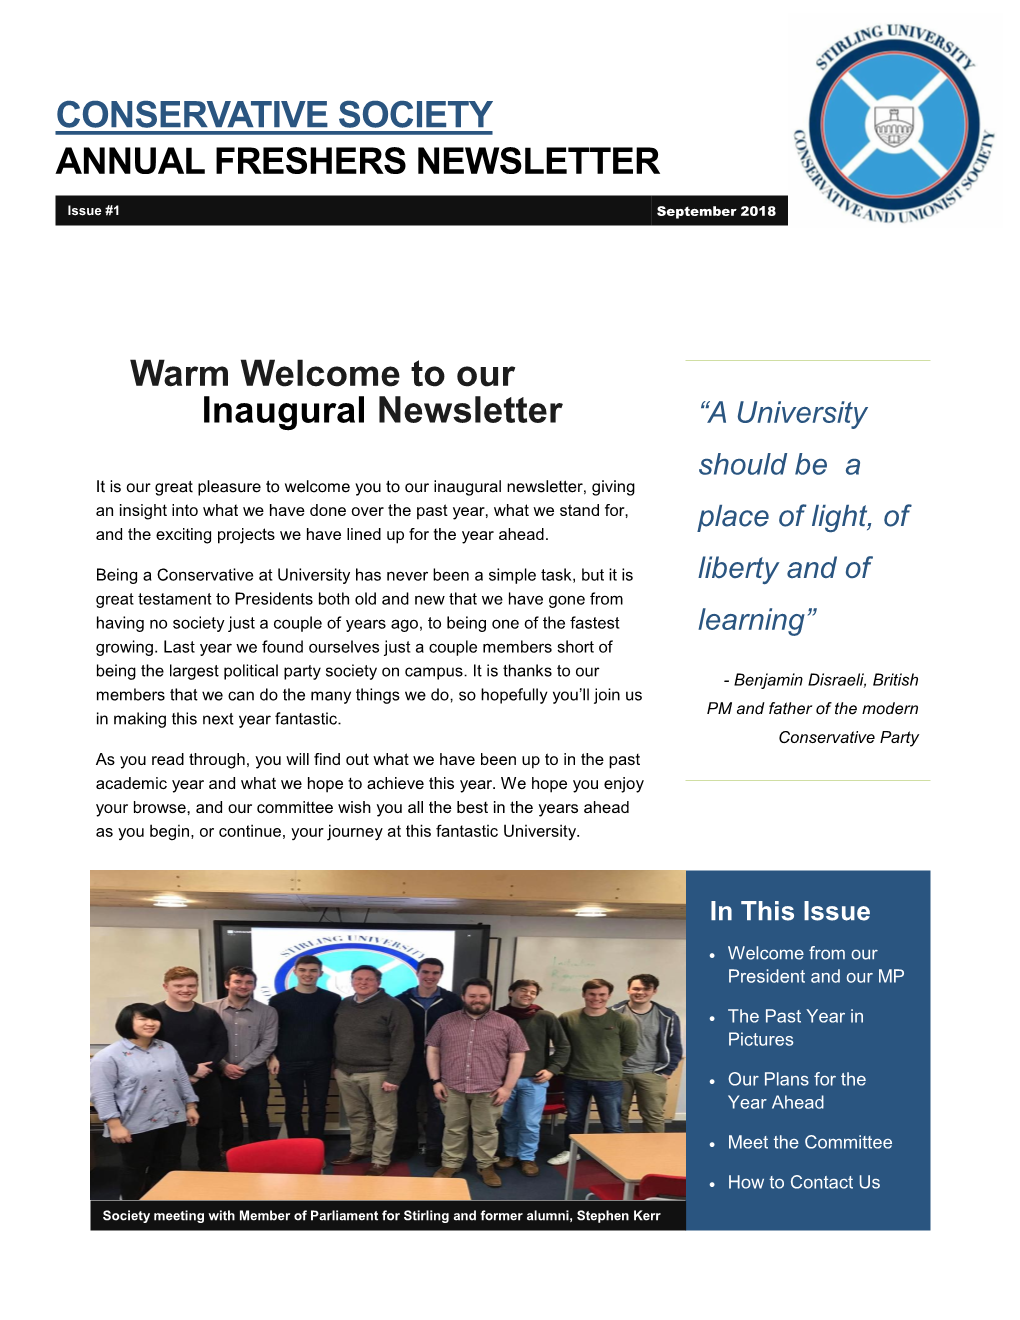 Conservative Society Annual Freshers Newsletter